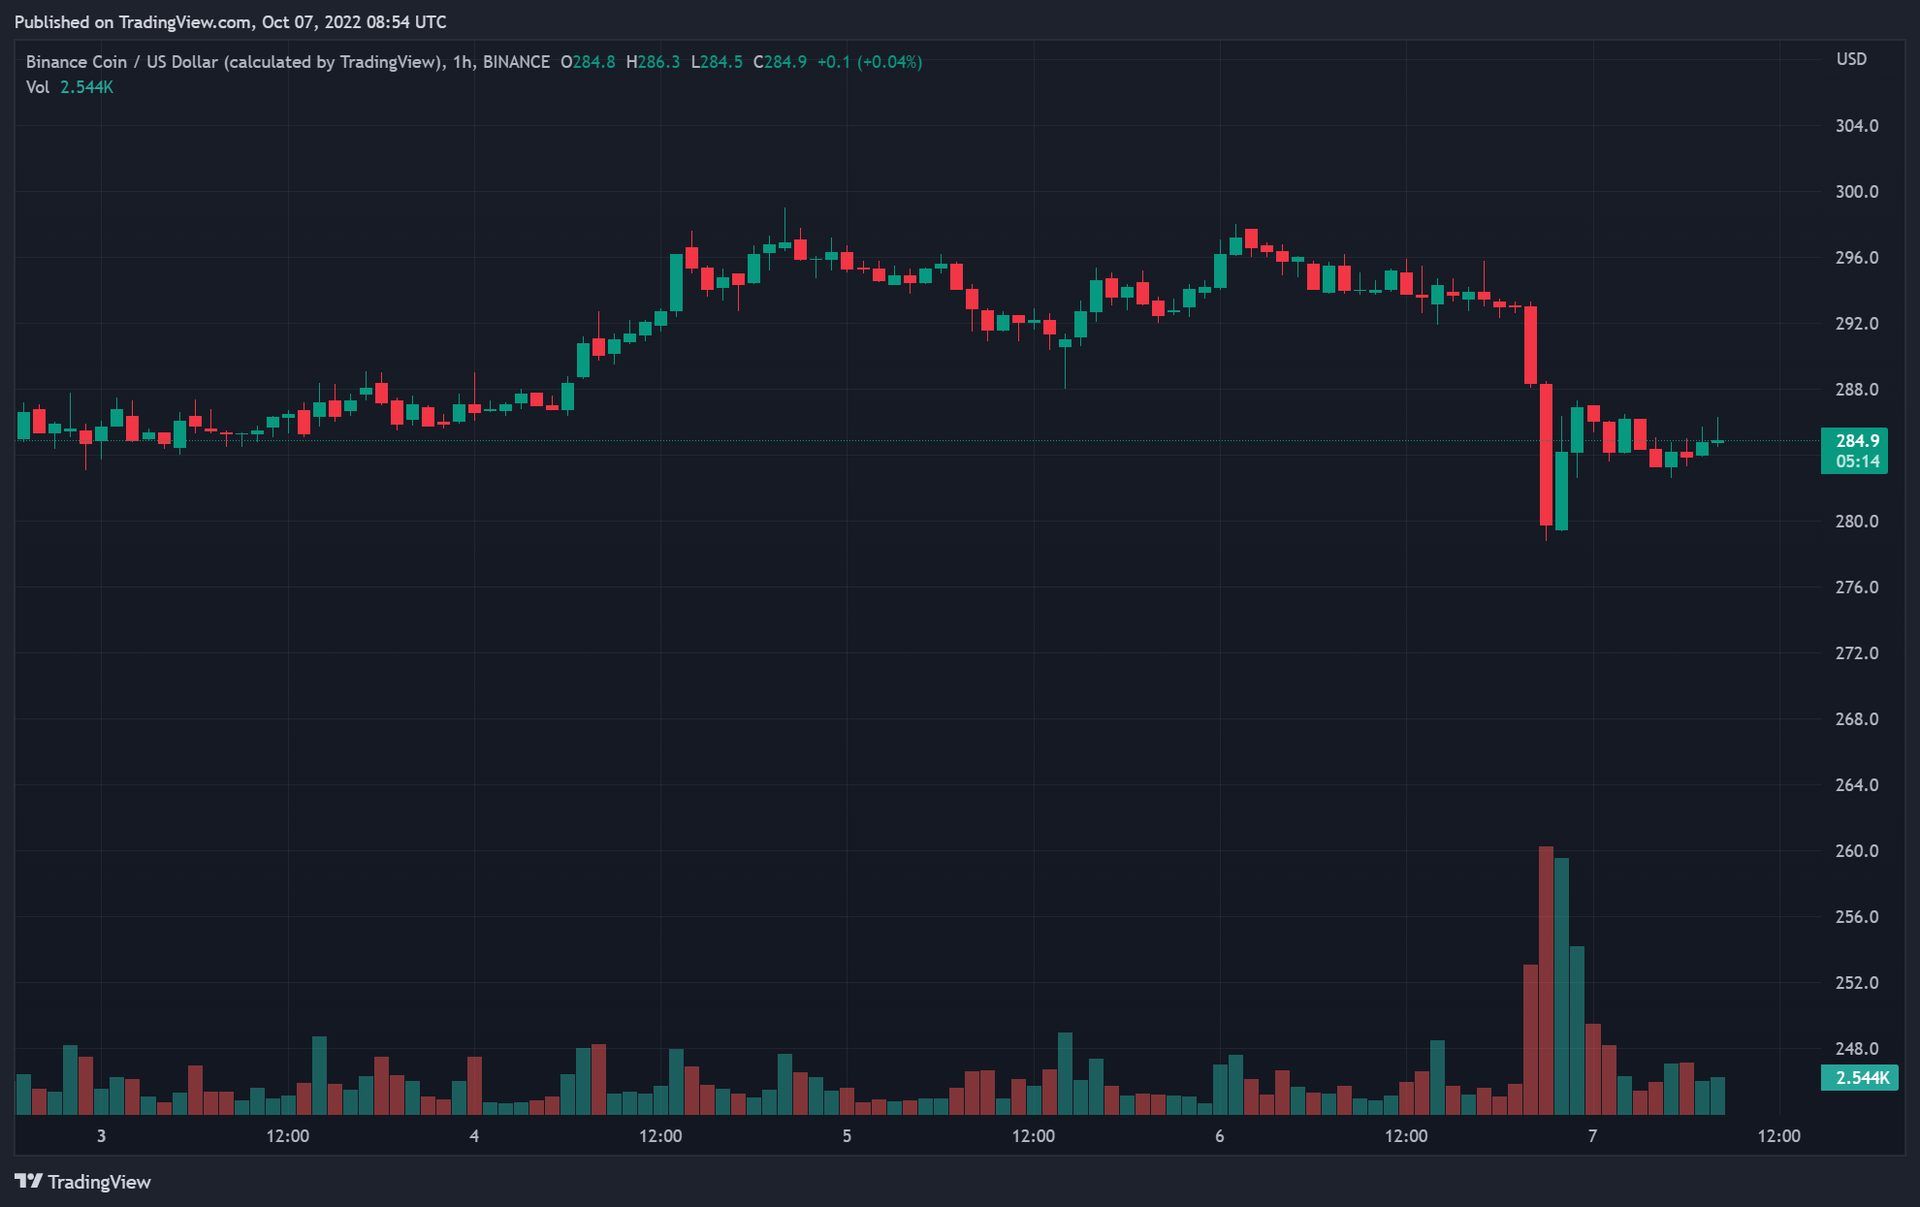 Binance hacked: $560M drained, BSC paused